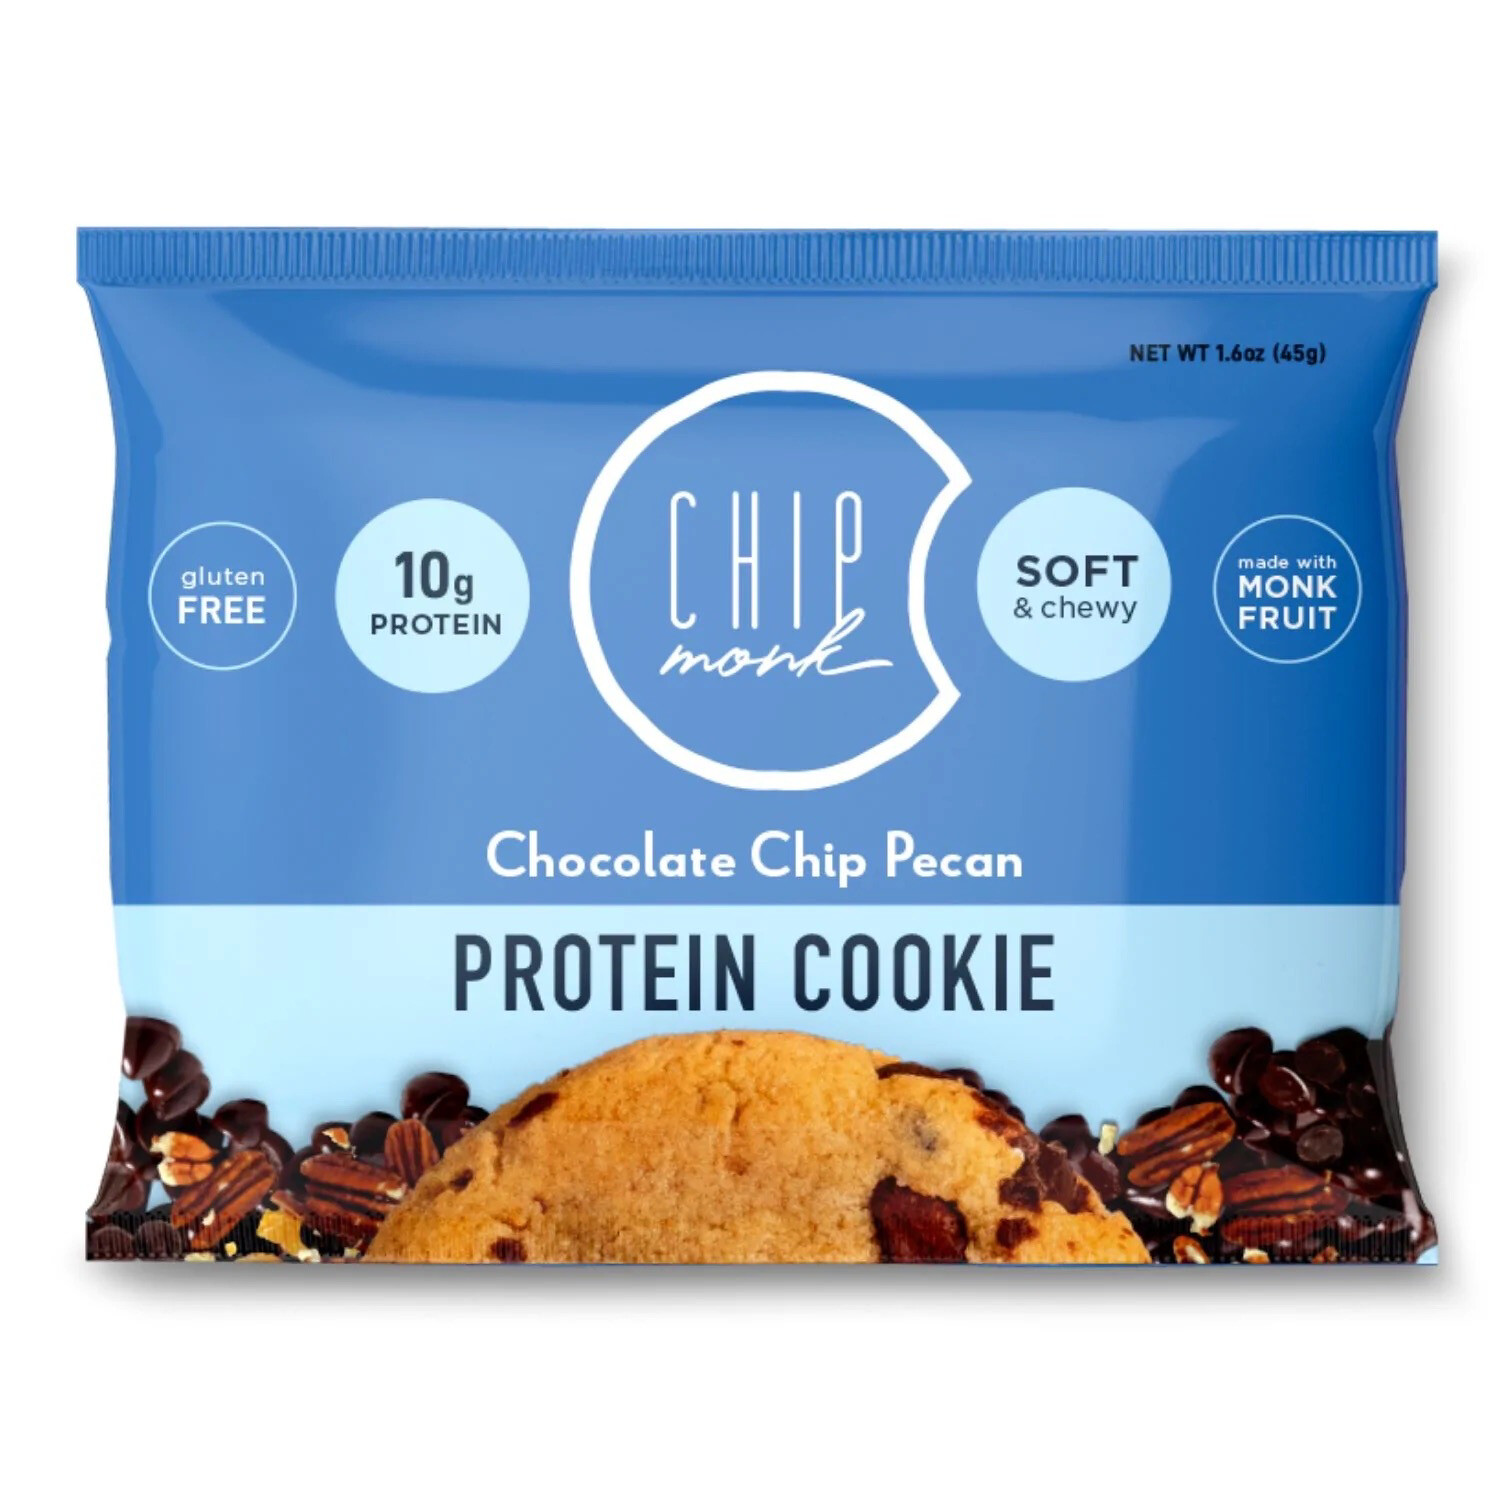 Chip Monk Chocolate Chip Pecan 10g Protein Cookie 